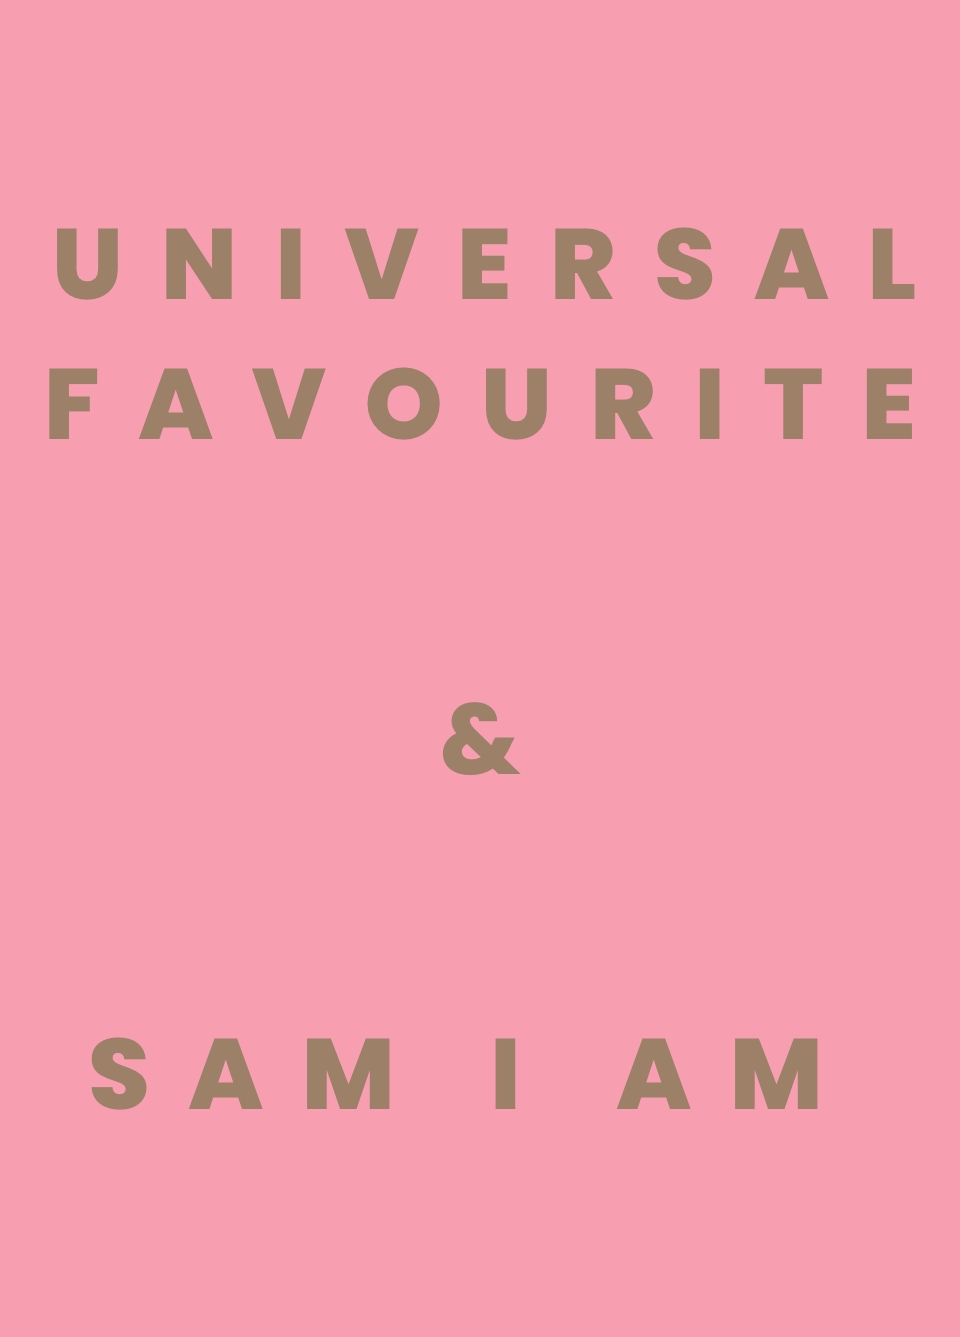 “We Consider Sam I Am As Our Creative Partners” – Universal Favourite